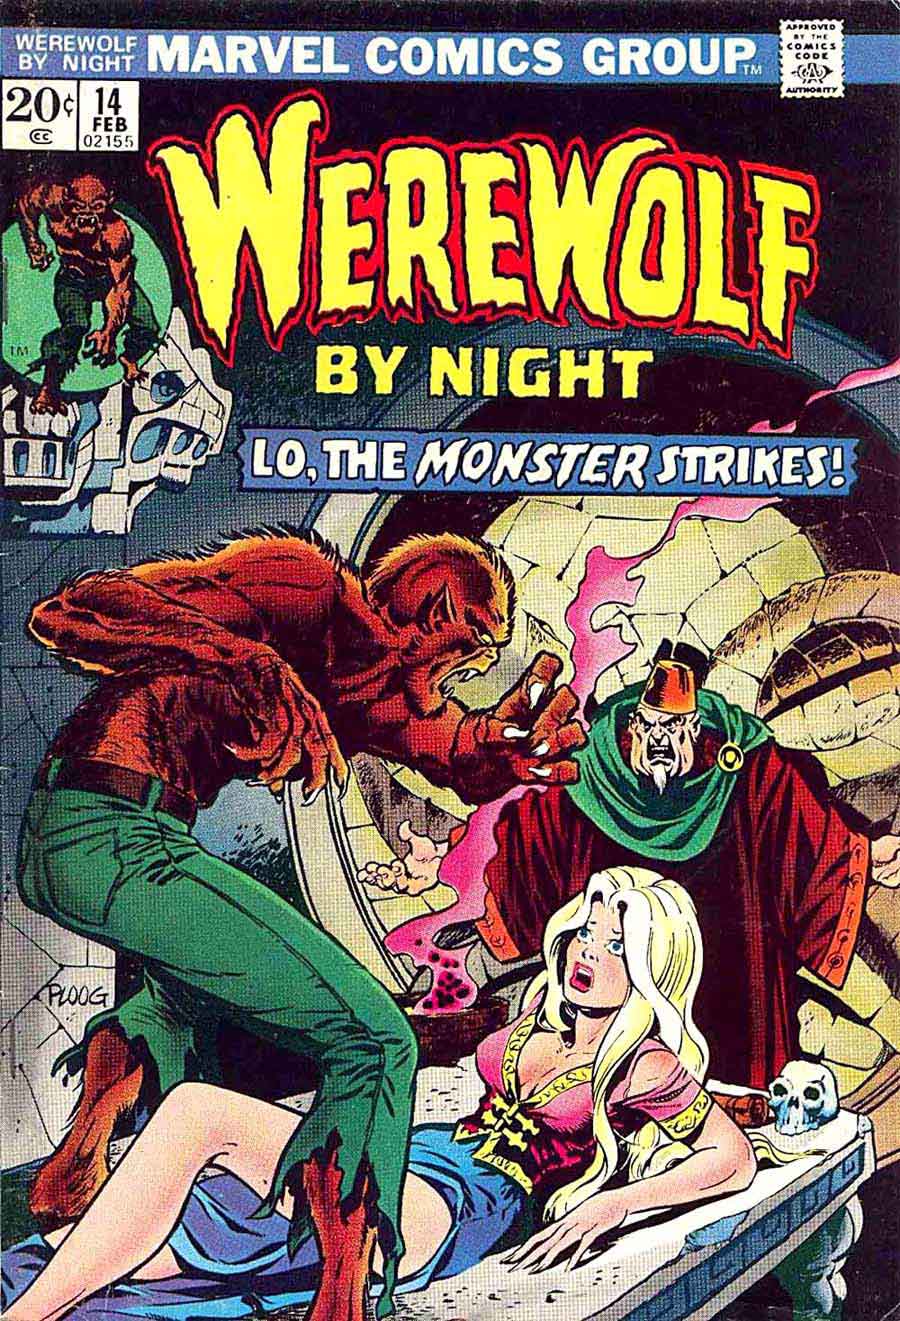 Werewolf by Night v1 #14 1970s marvel comic book cover art by Mike Ploog